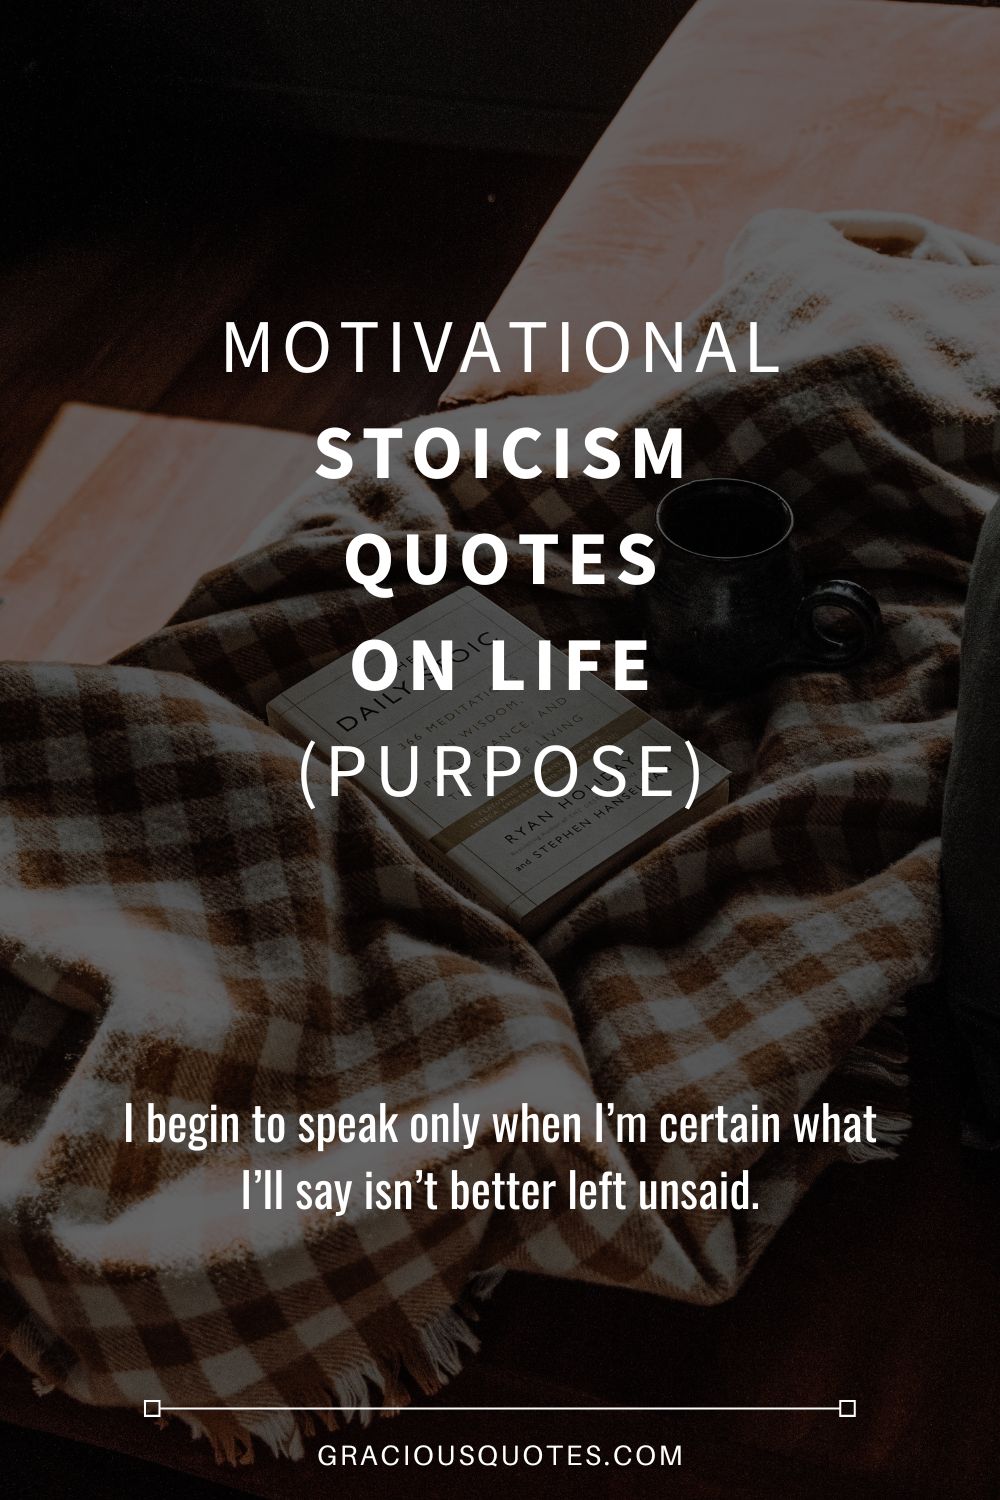 Motivational Stoicism Quotes on Life (PURPOSE) - Gracious Quotes